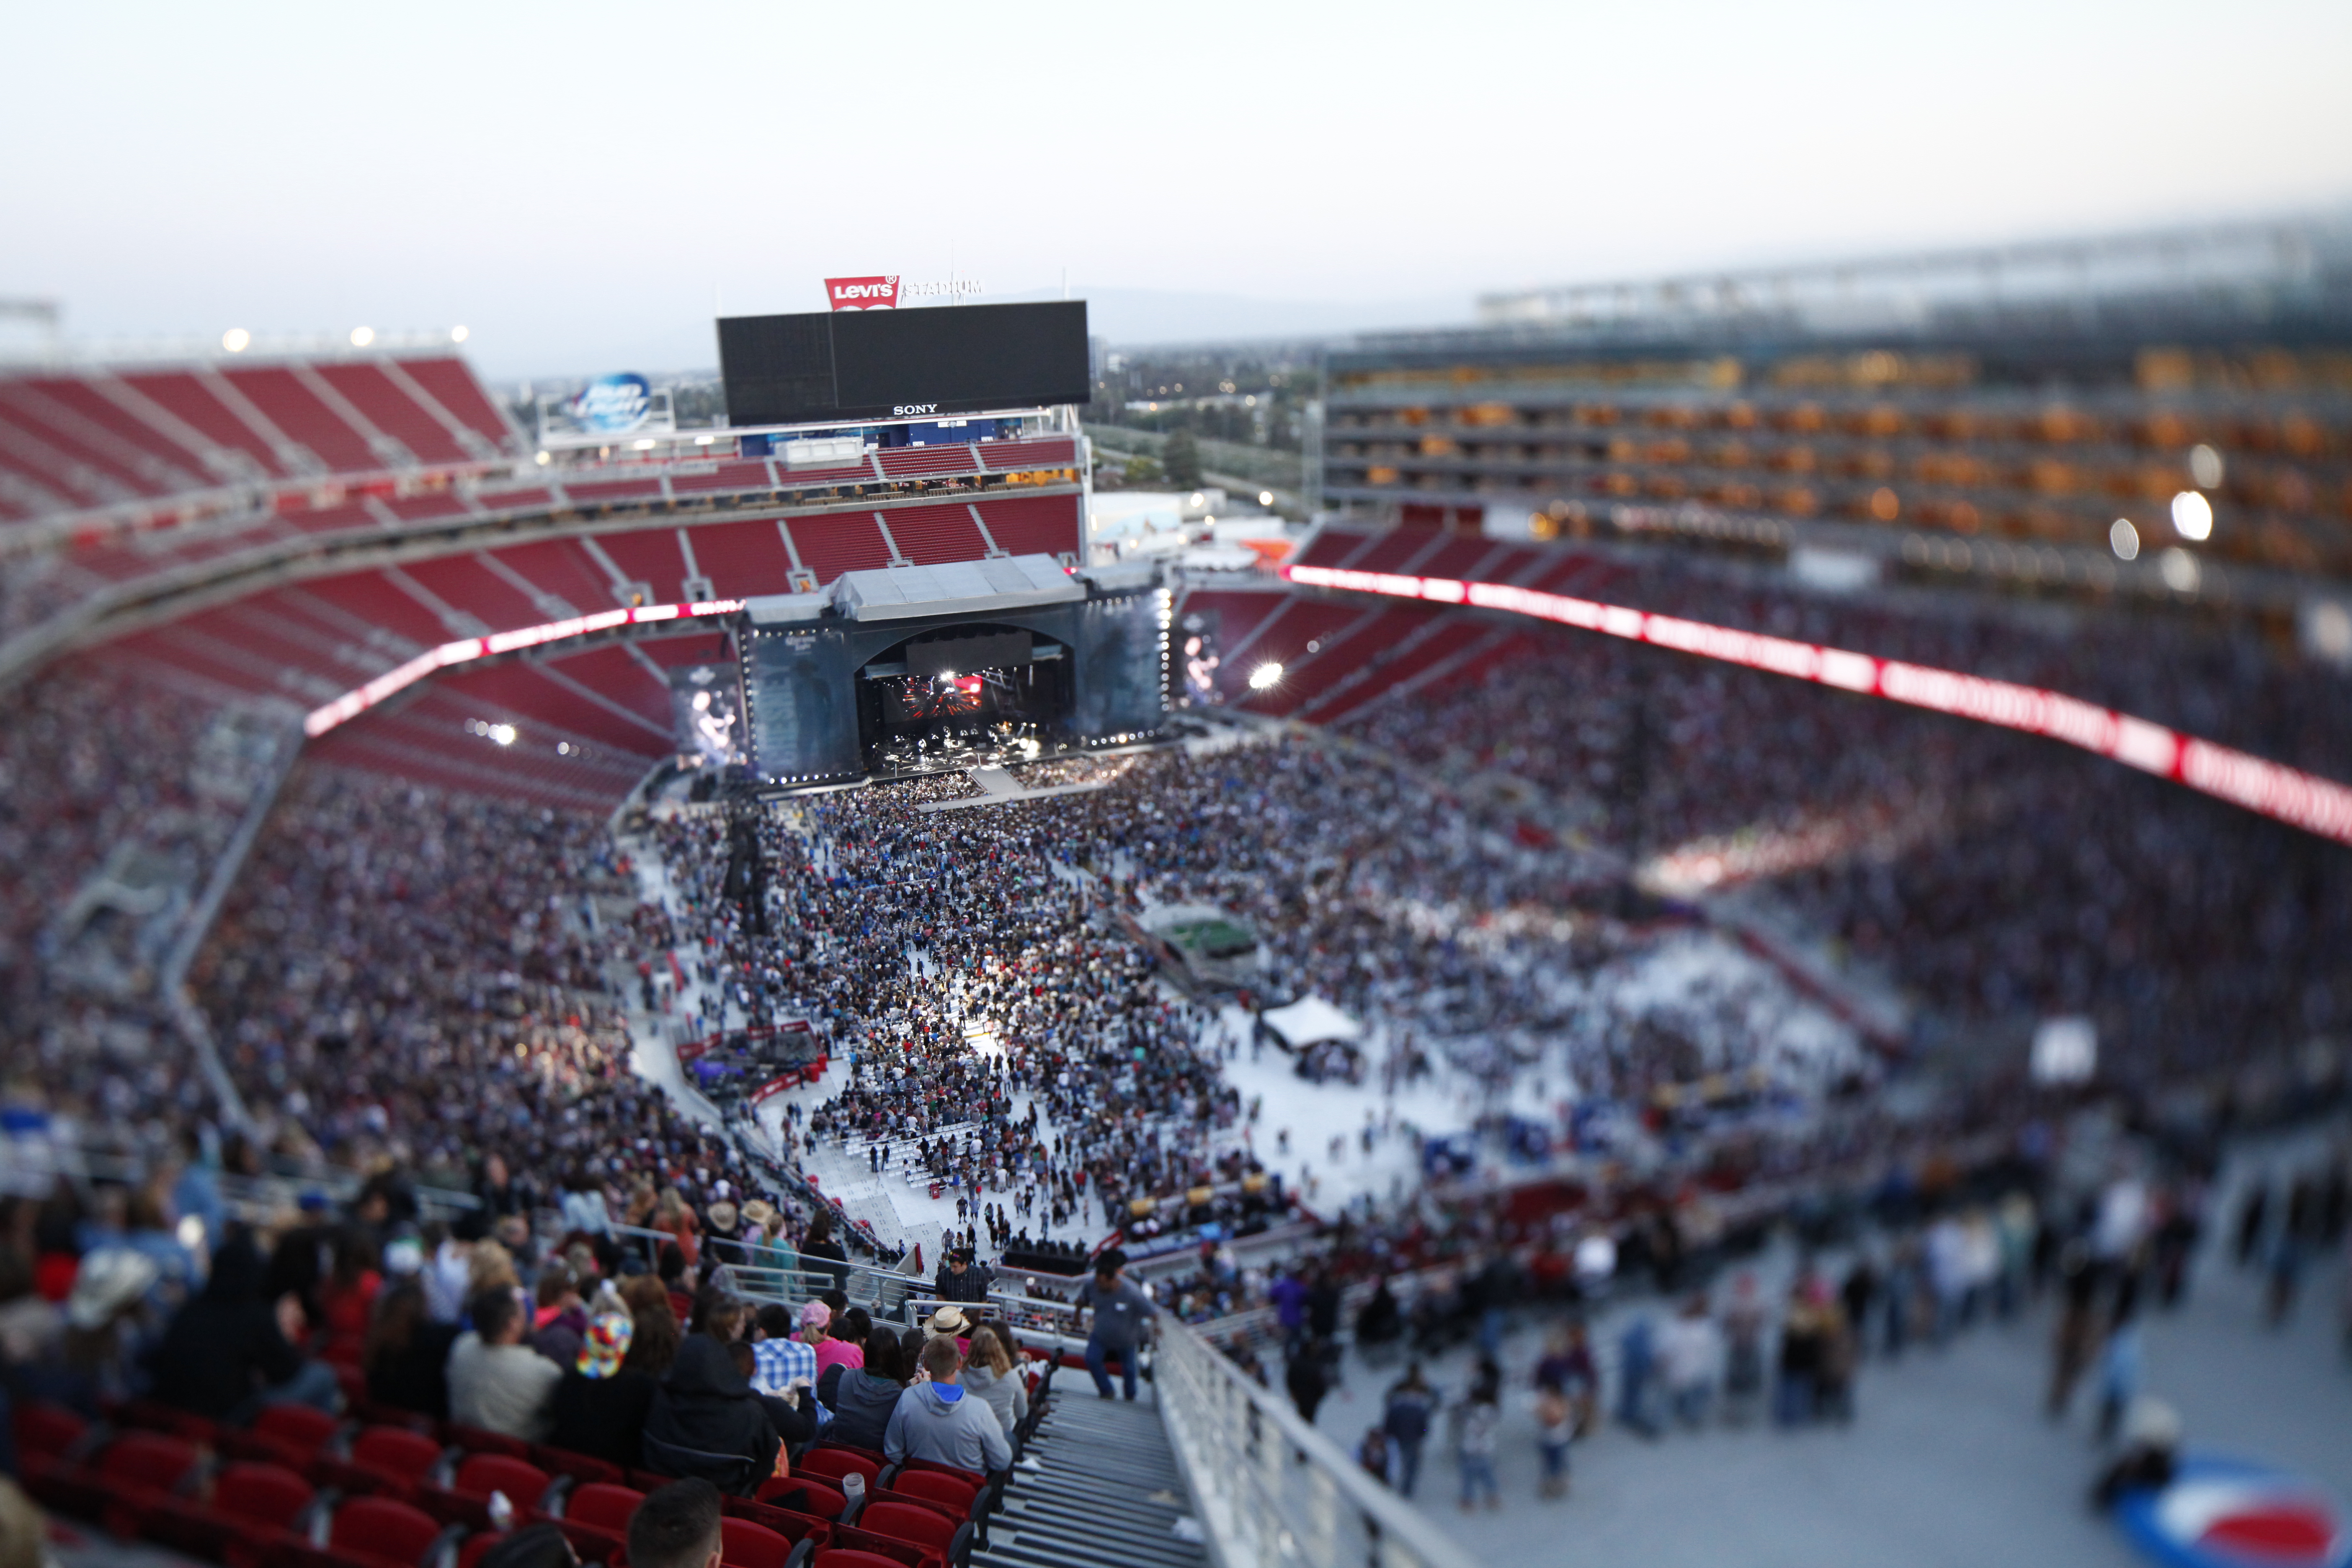 Favorite Moments from our First Concert - Levi's® Stadium5616 x 3744